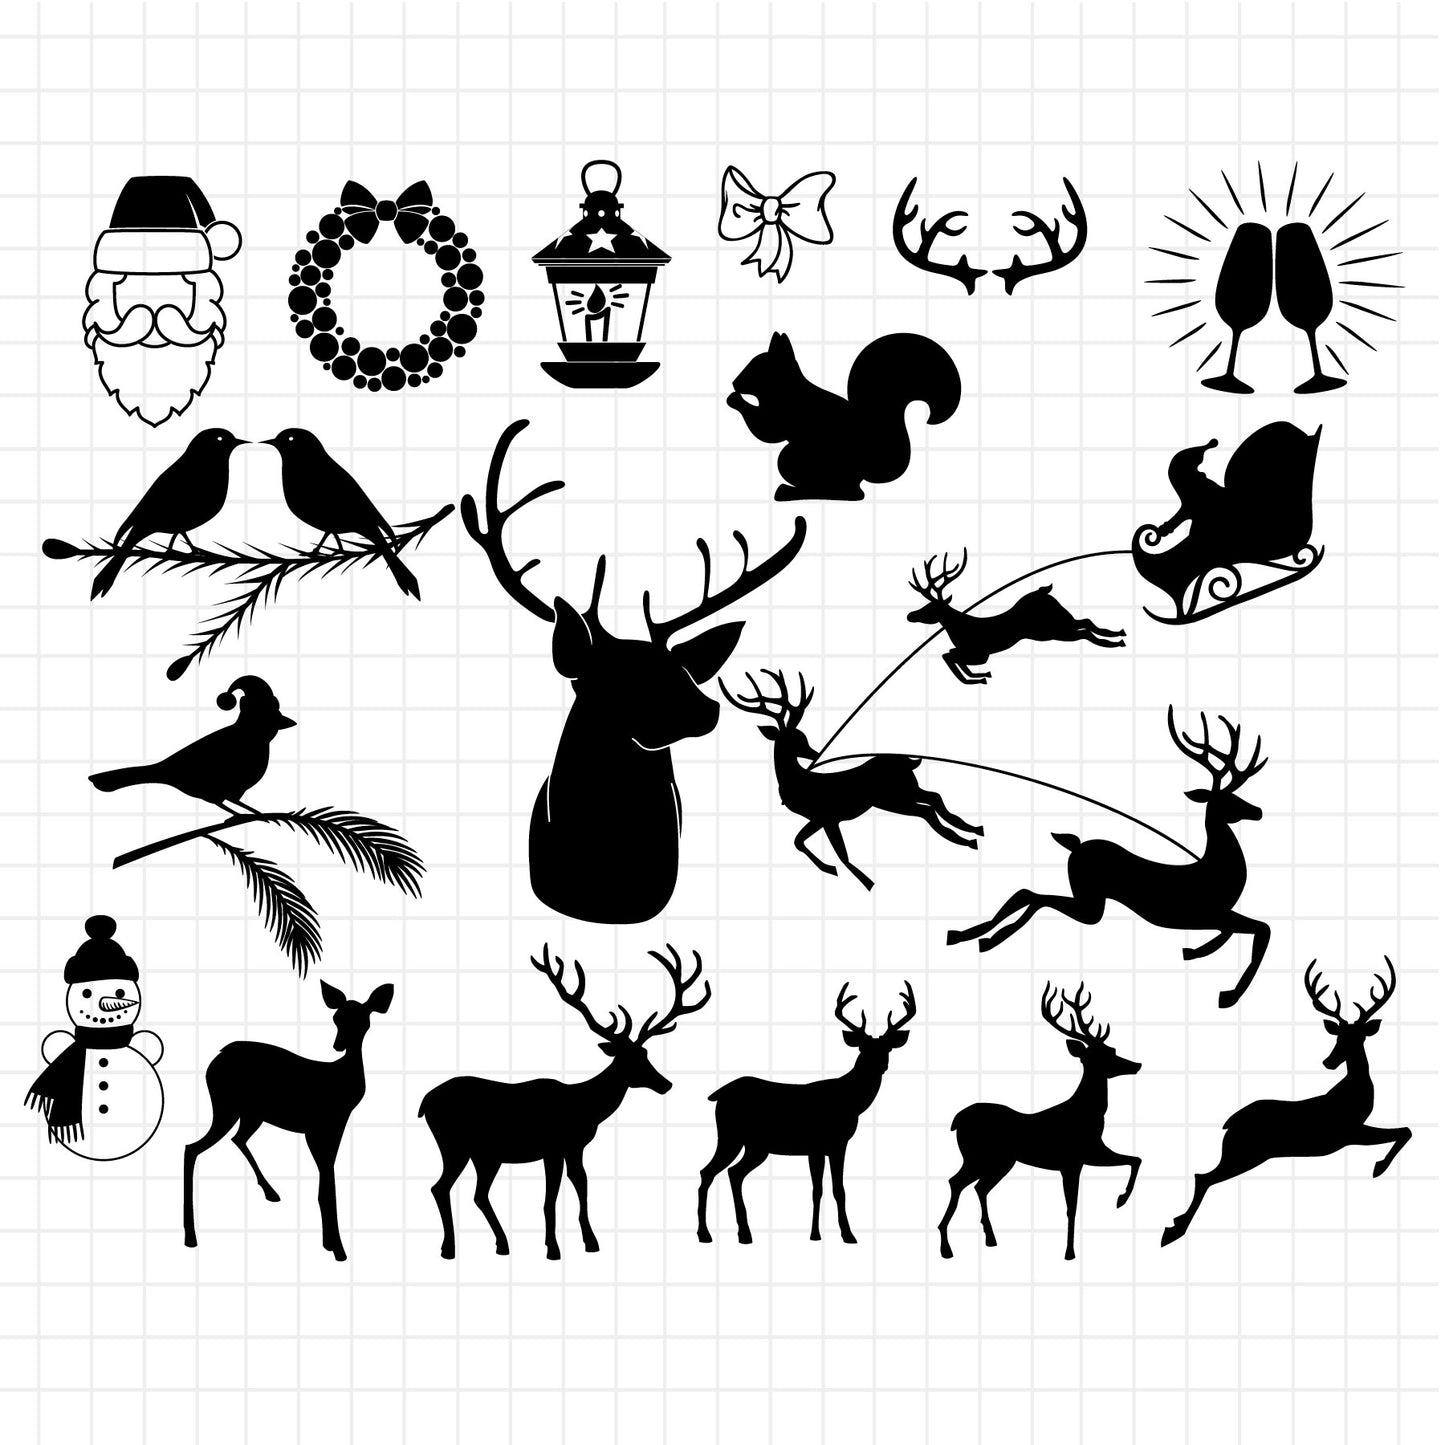 COD1405 - Christmas Clipart/Snowflake Clipart /SVG/DXF/winter Clipart/holiday printable/scrapbook cliparts/Commercial use